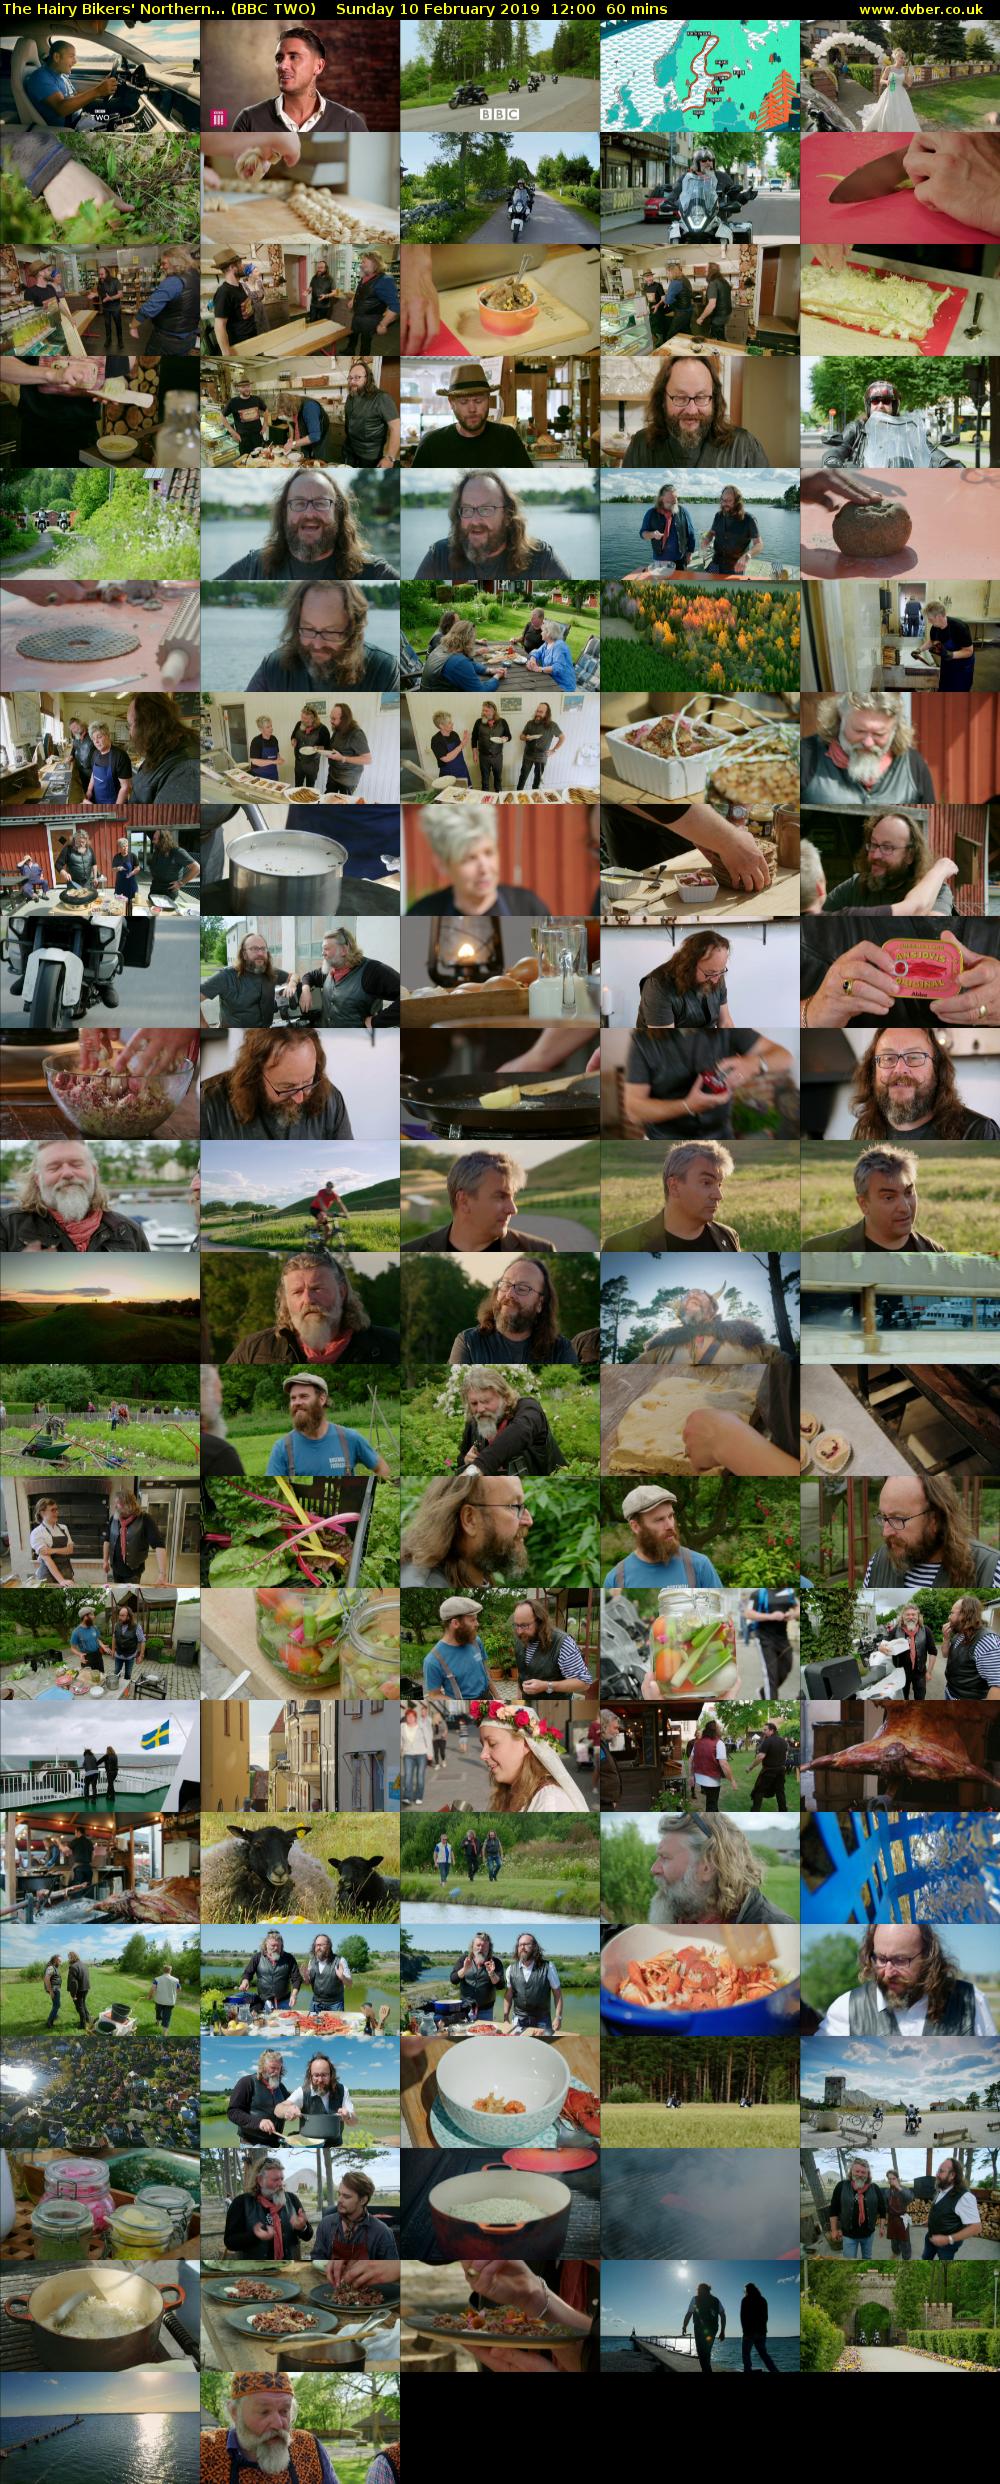 The Hairy Bikers' Northern... (BBC TWO) Sunday 10 February 2019 12:00 - 13:00